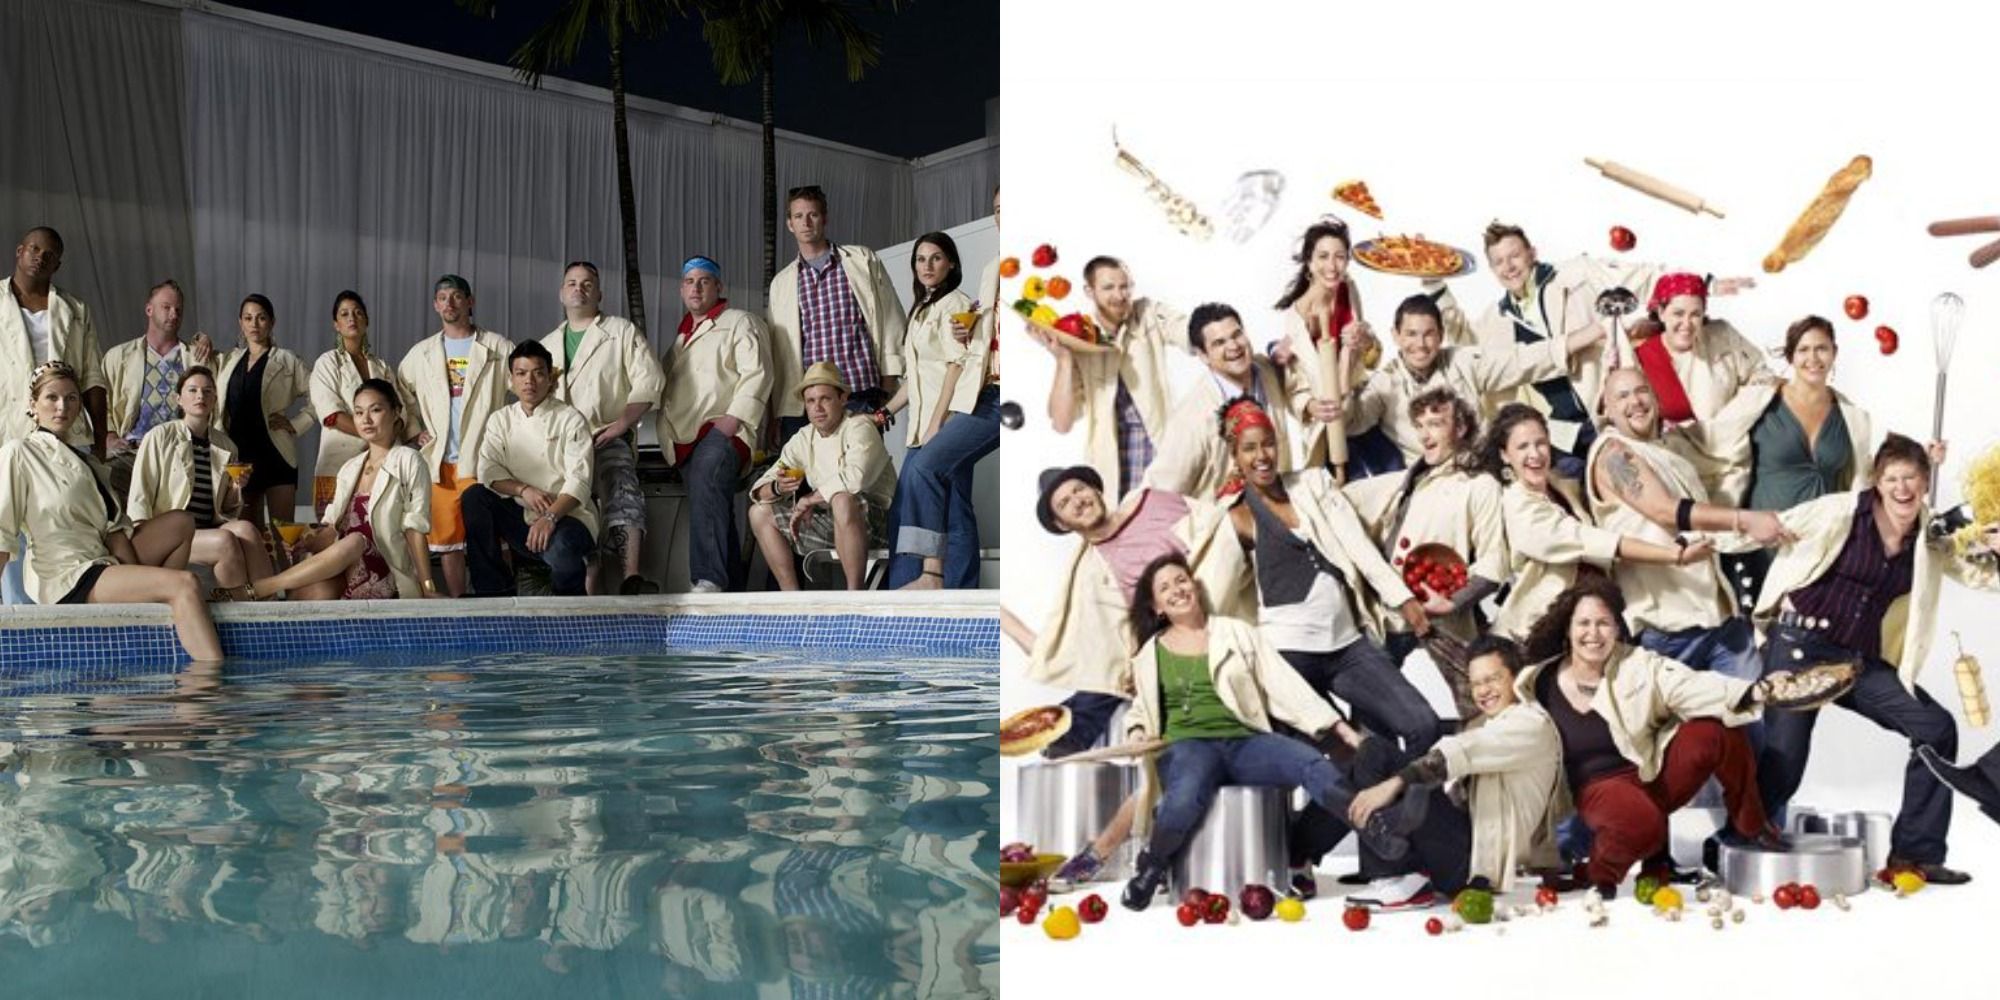 Two seasons of top chef cast side by side